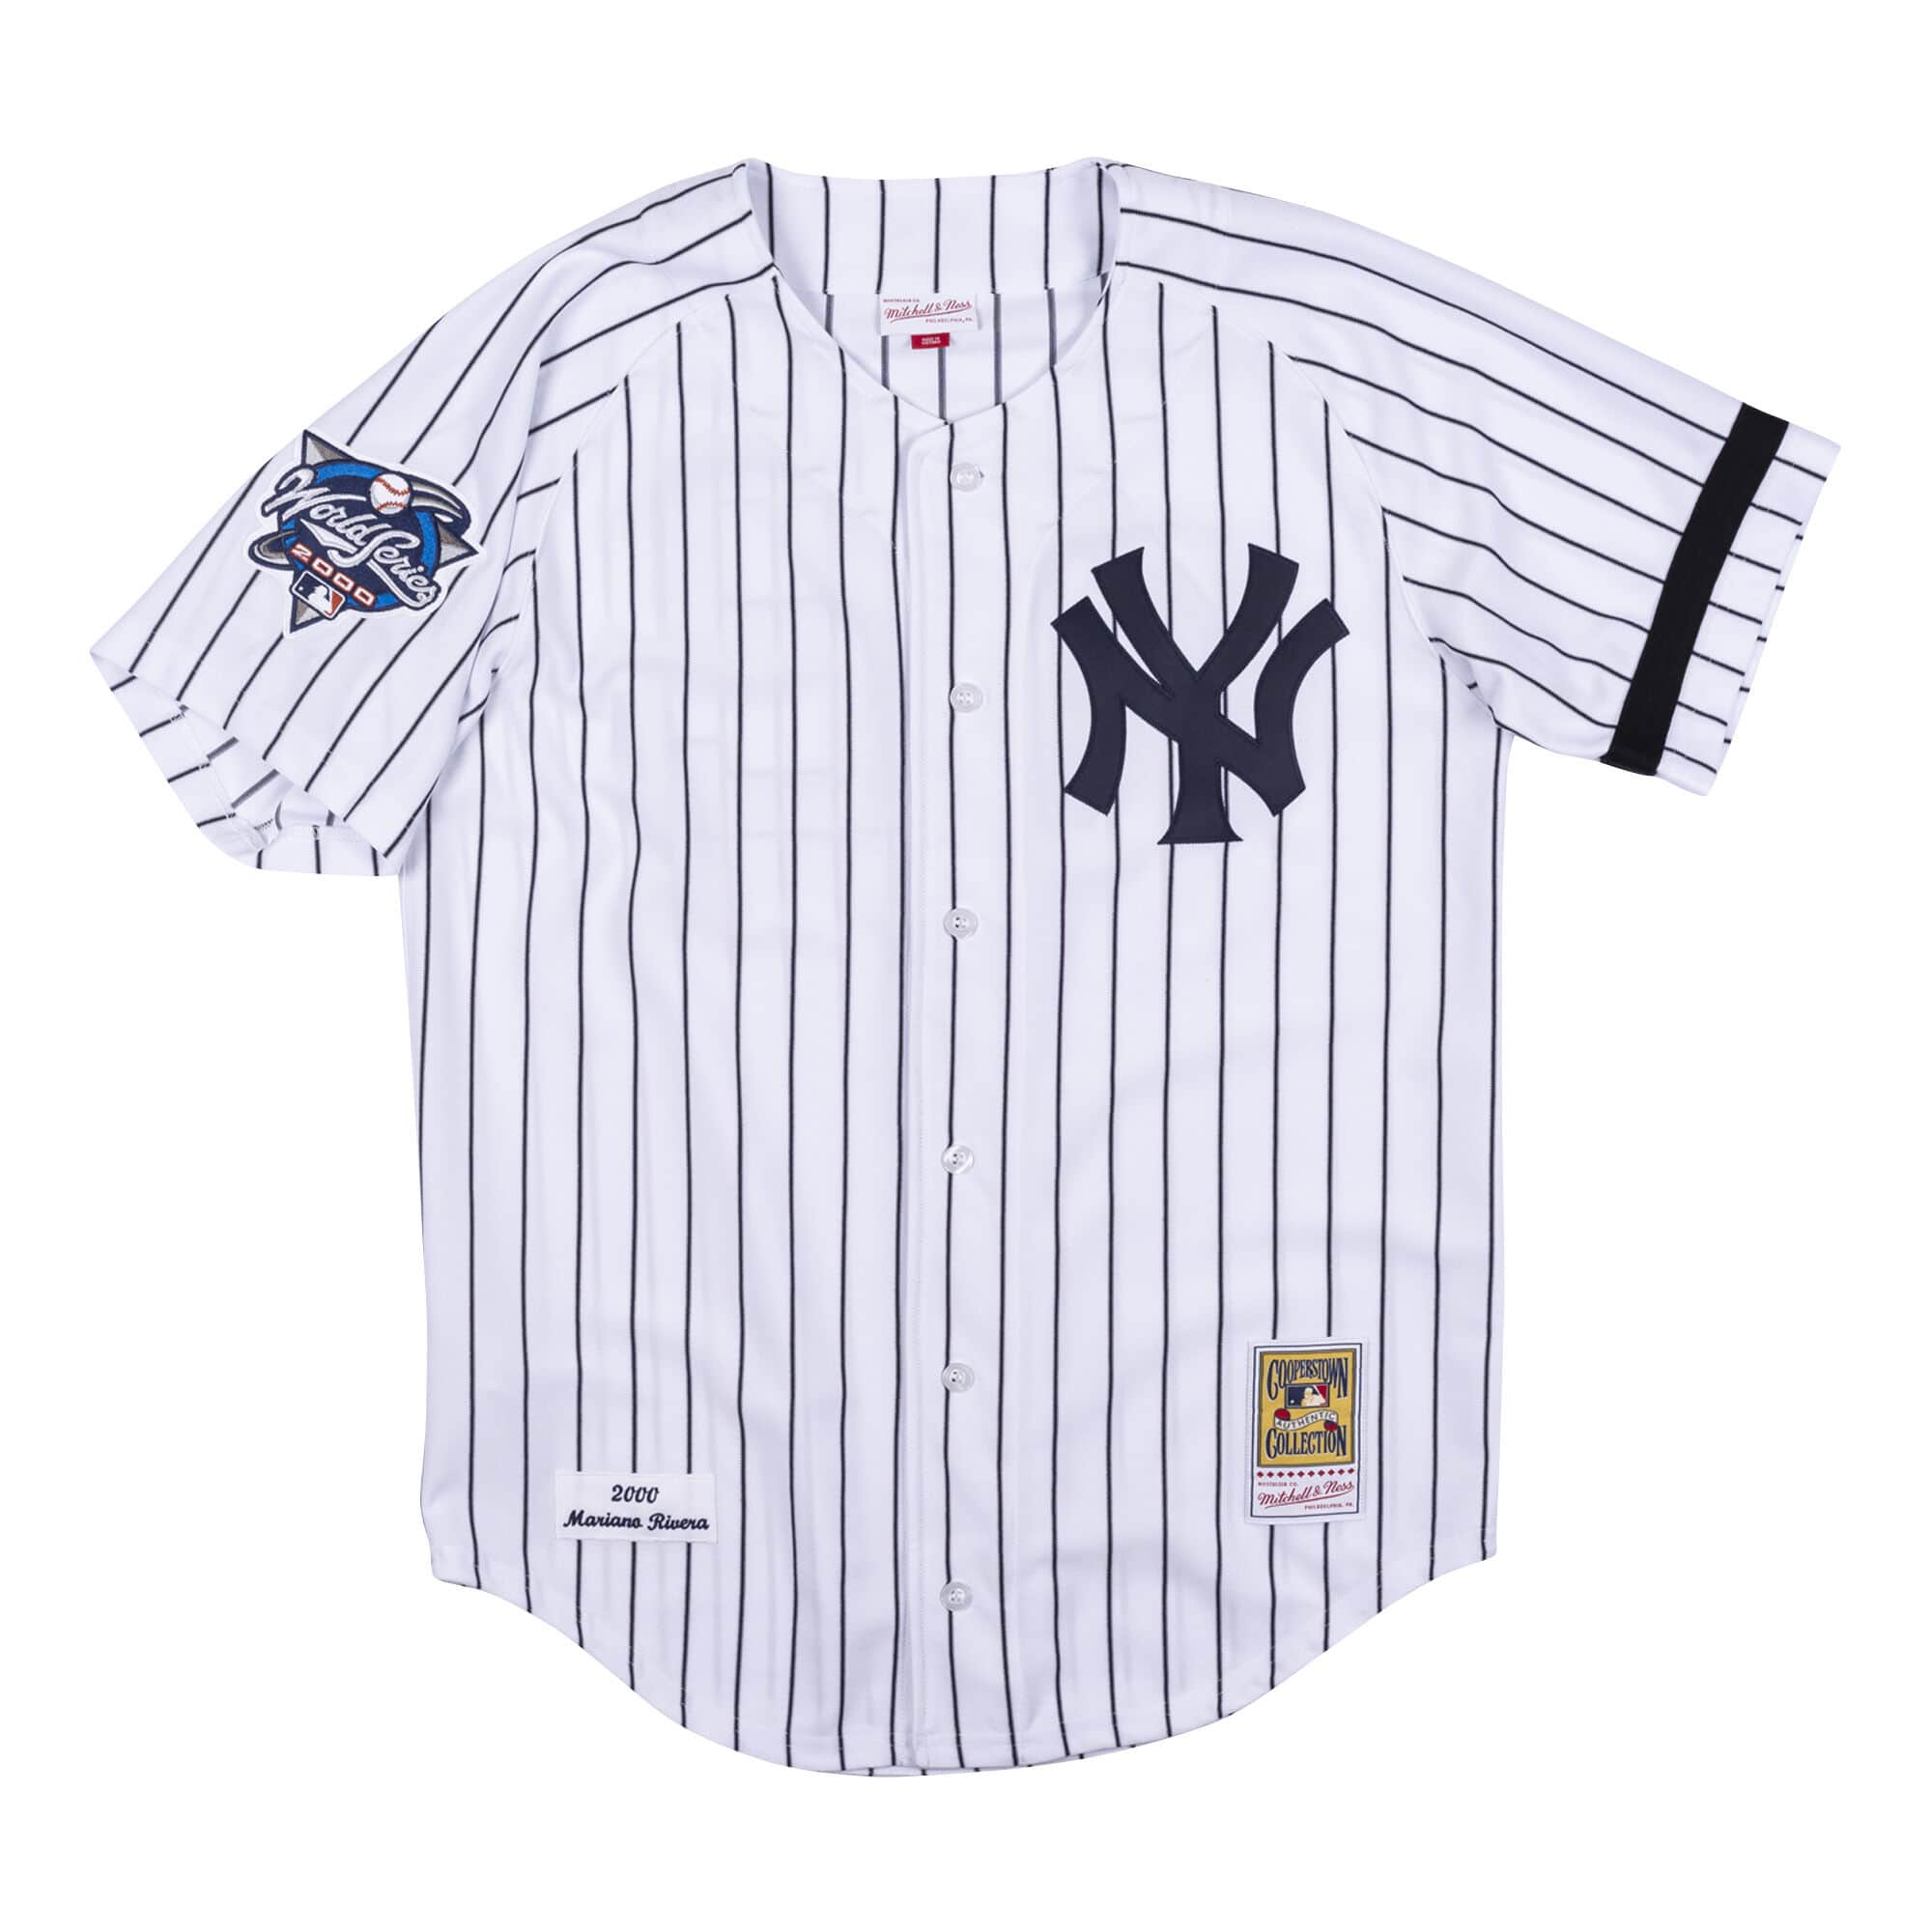 Mitchell & Ness Authentic Jersey White NY Yankees 2000 WS Bernie Williams